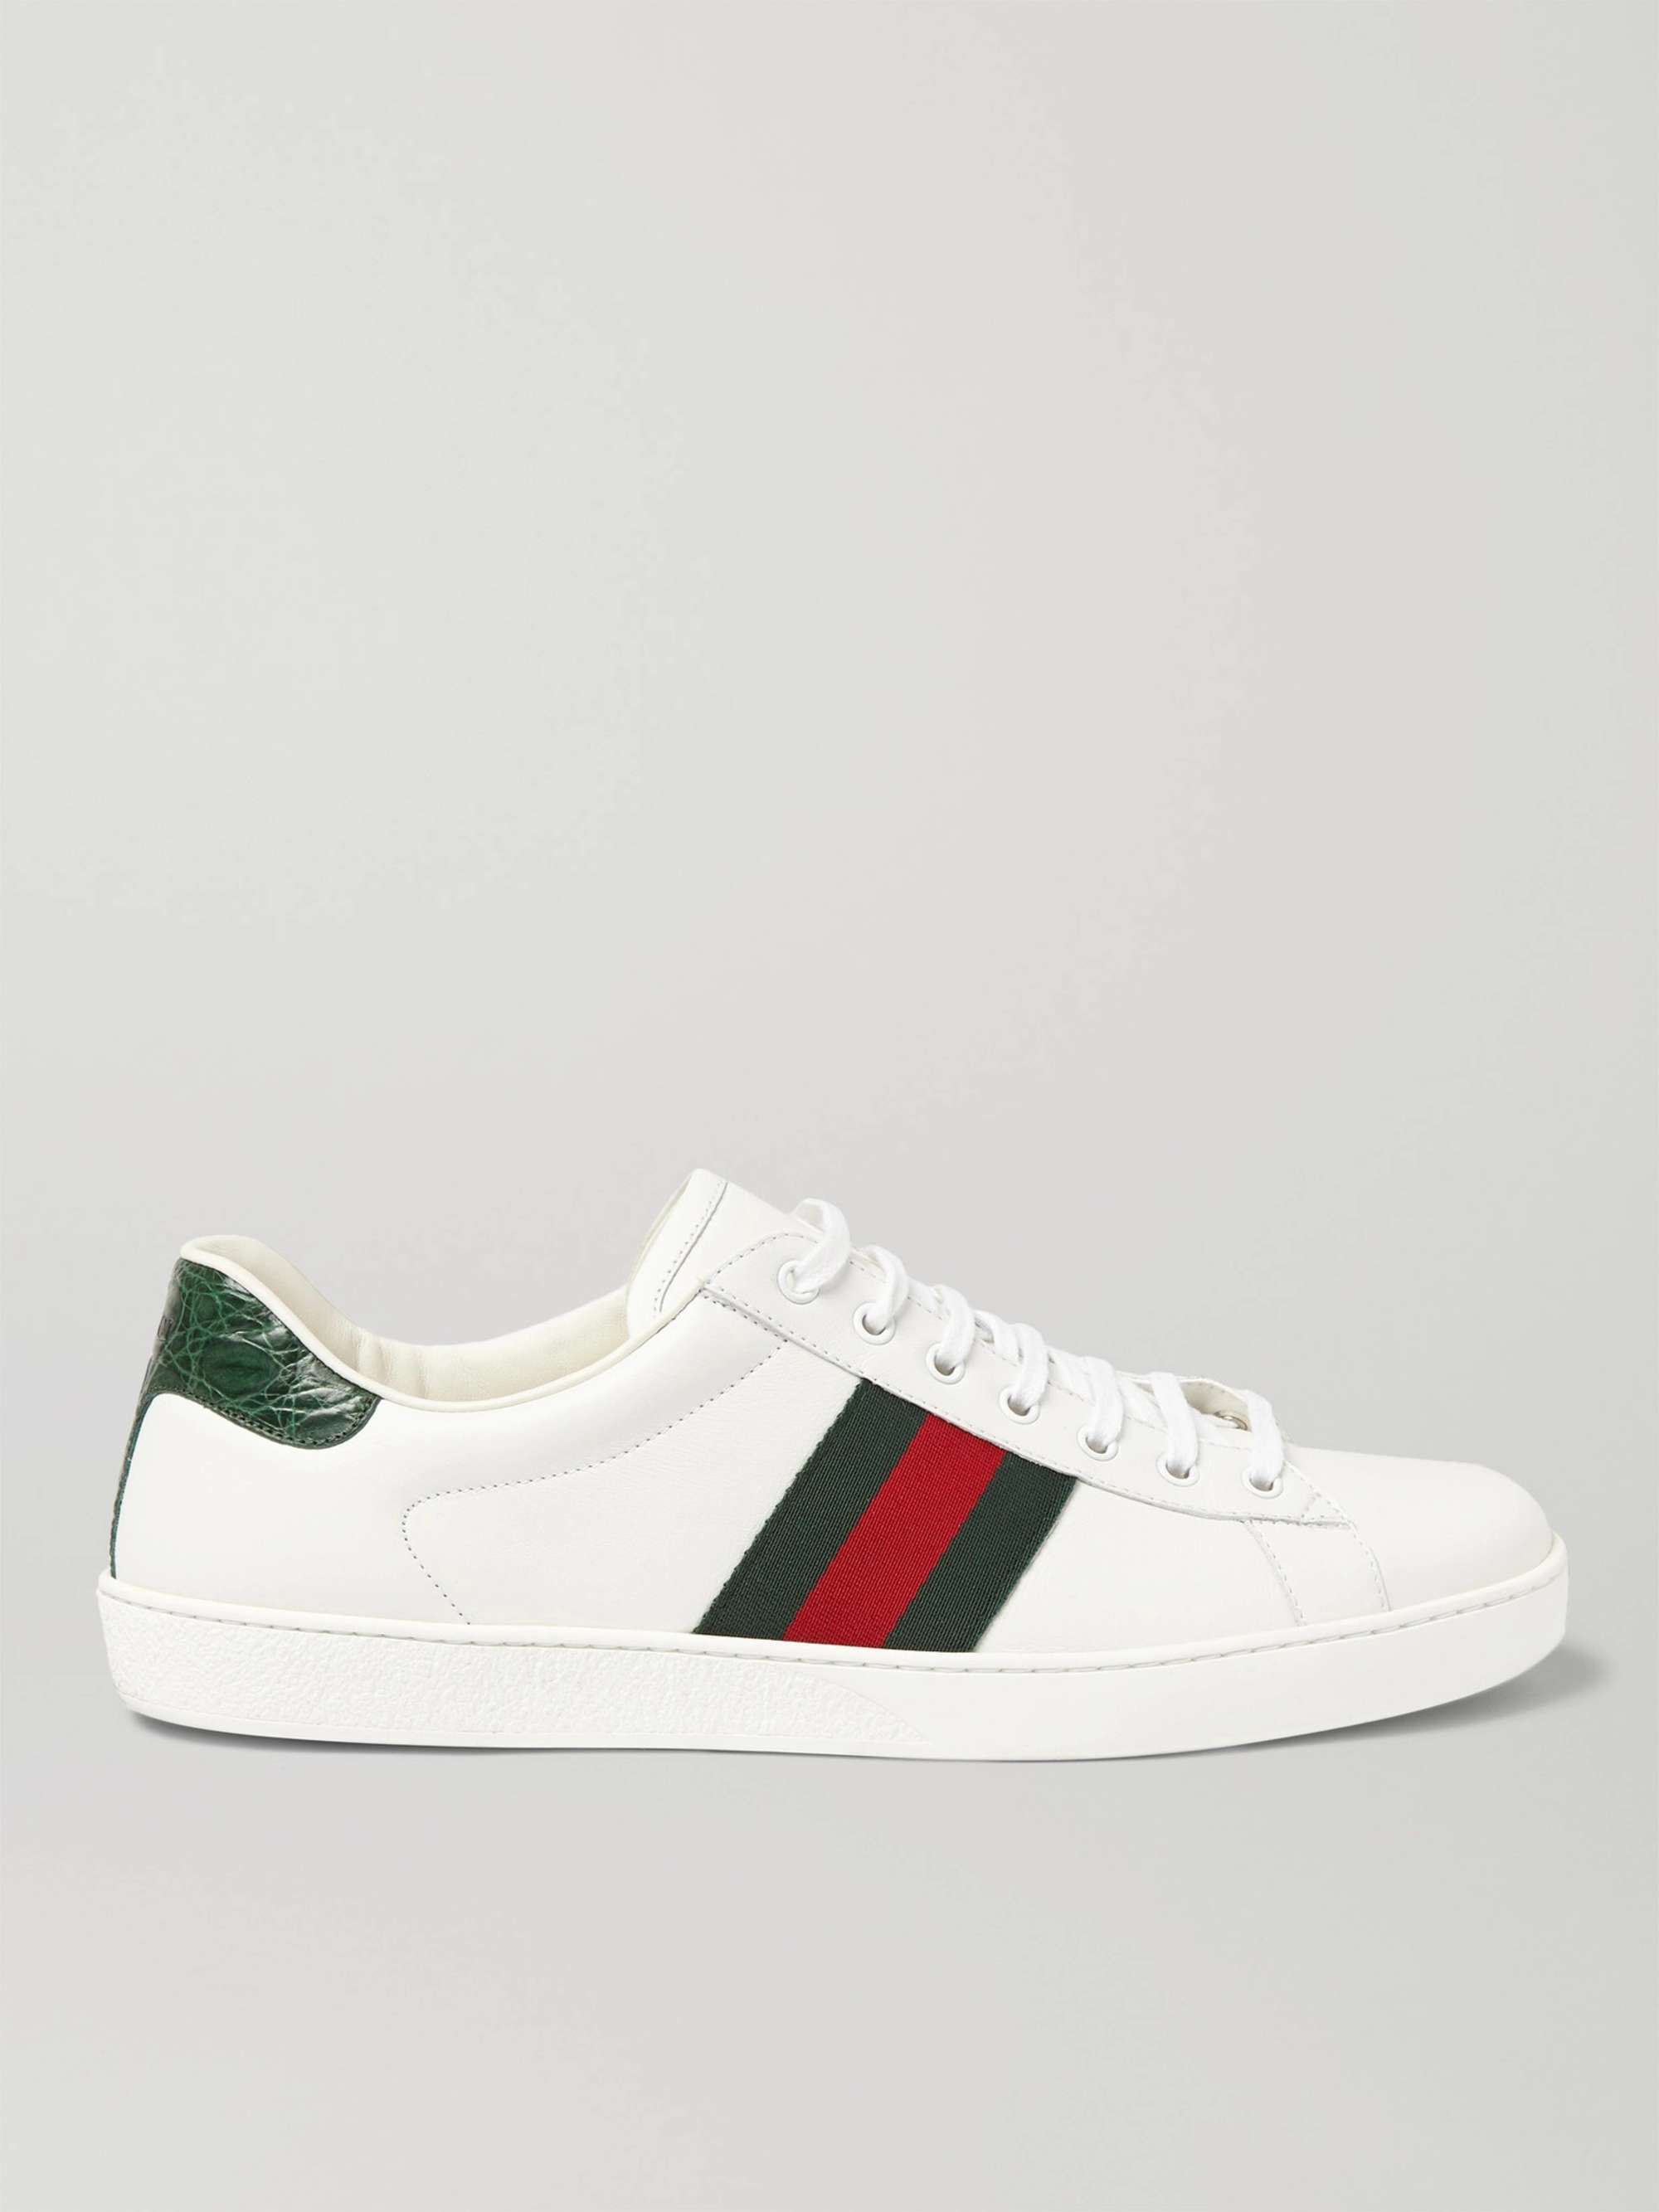 GUCCI Ace Crocodile-Trimmed Leather Sneakers | MR PORTER